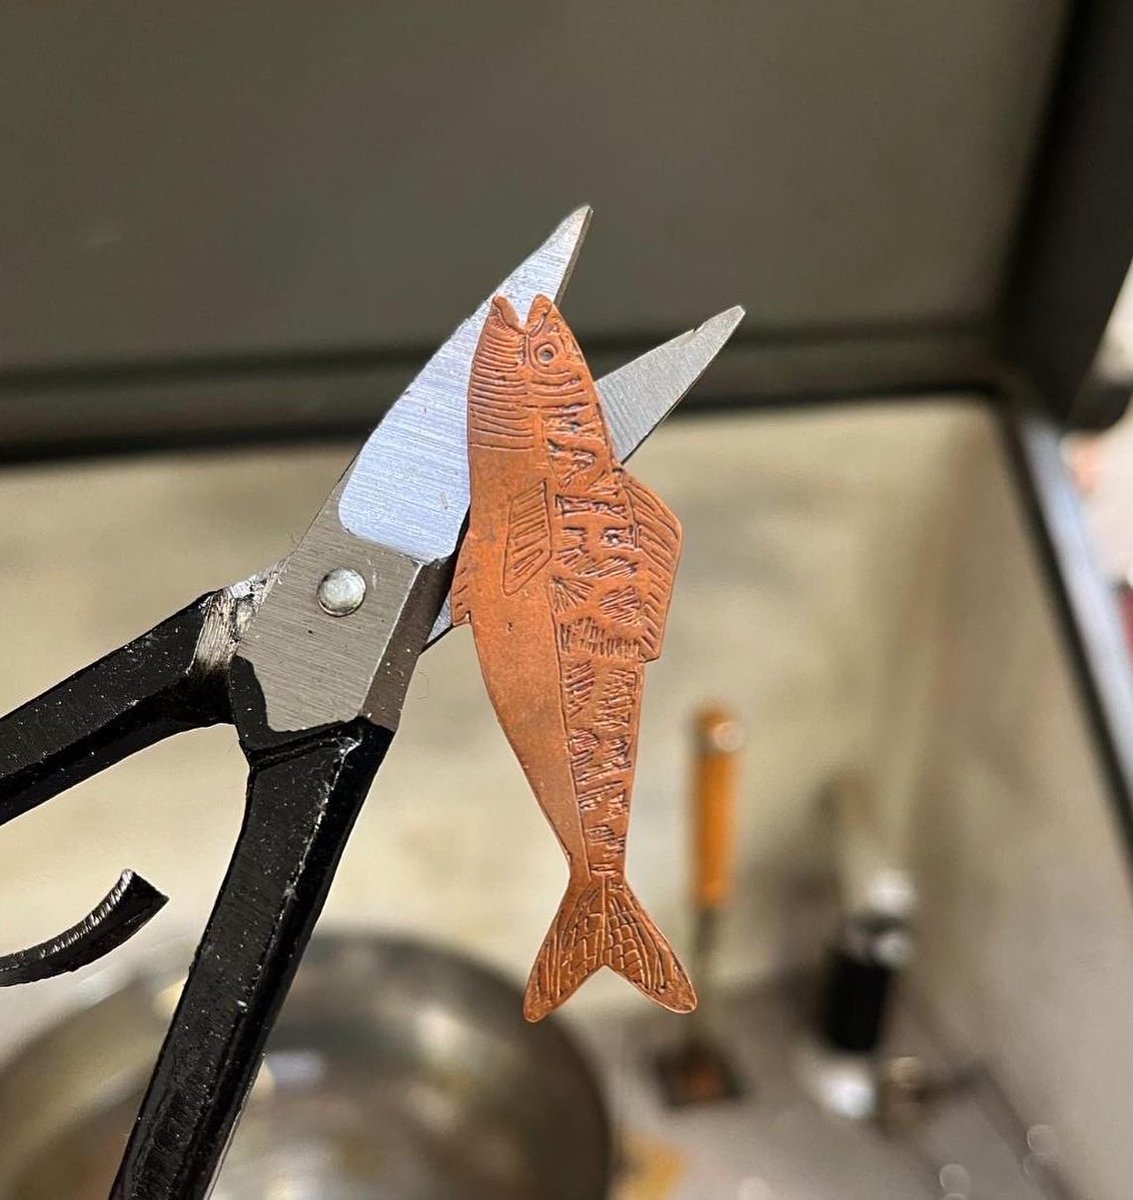 Just 1 place left on our 2 day coppersmith workshop. This is a great way to learn the fundamentals of working with copper and to create some beautiful things.
Head to Eventbrite for booking 👇 
seagulls.eventbrite.co.uk #copperworkshop #creativeworkshopleeds #seagullsworkshops